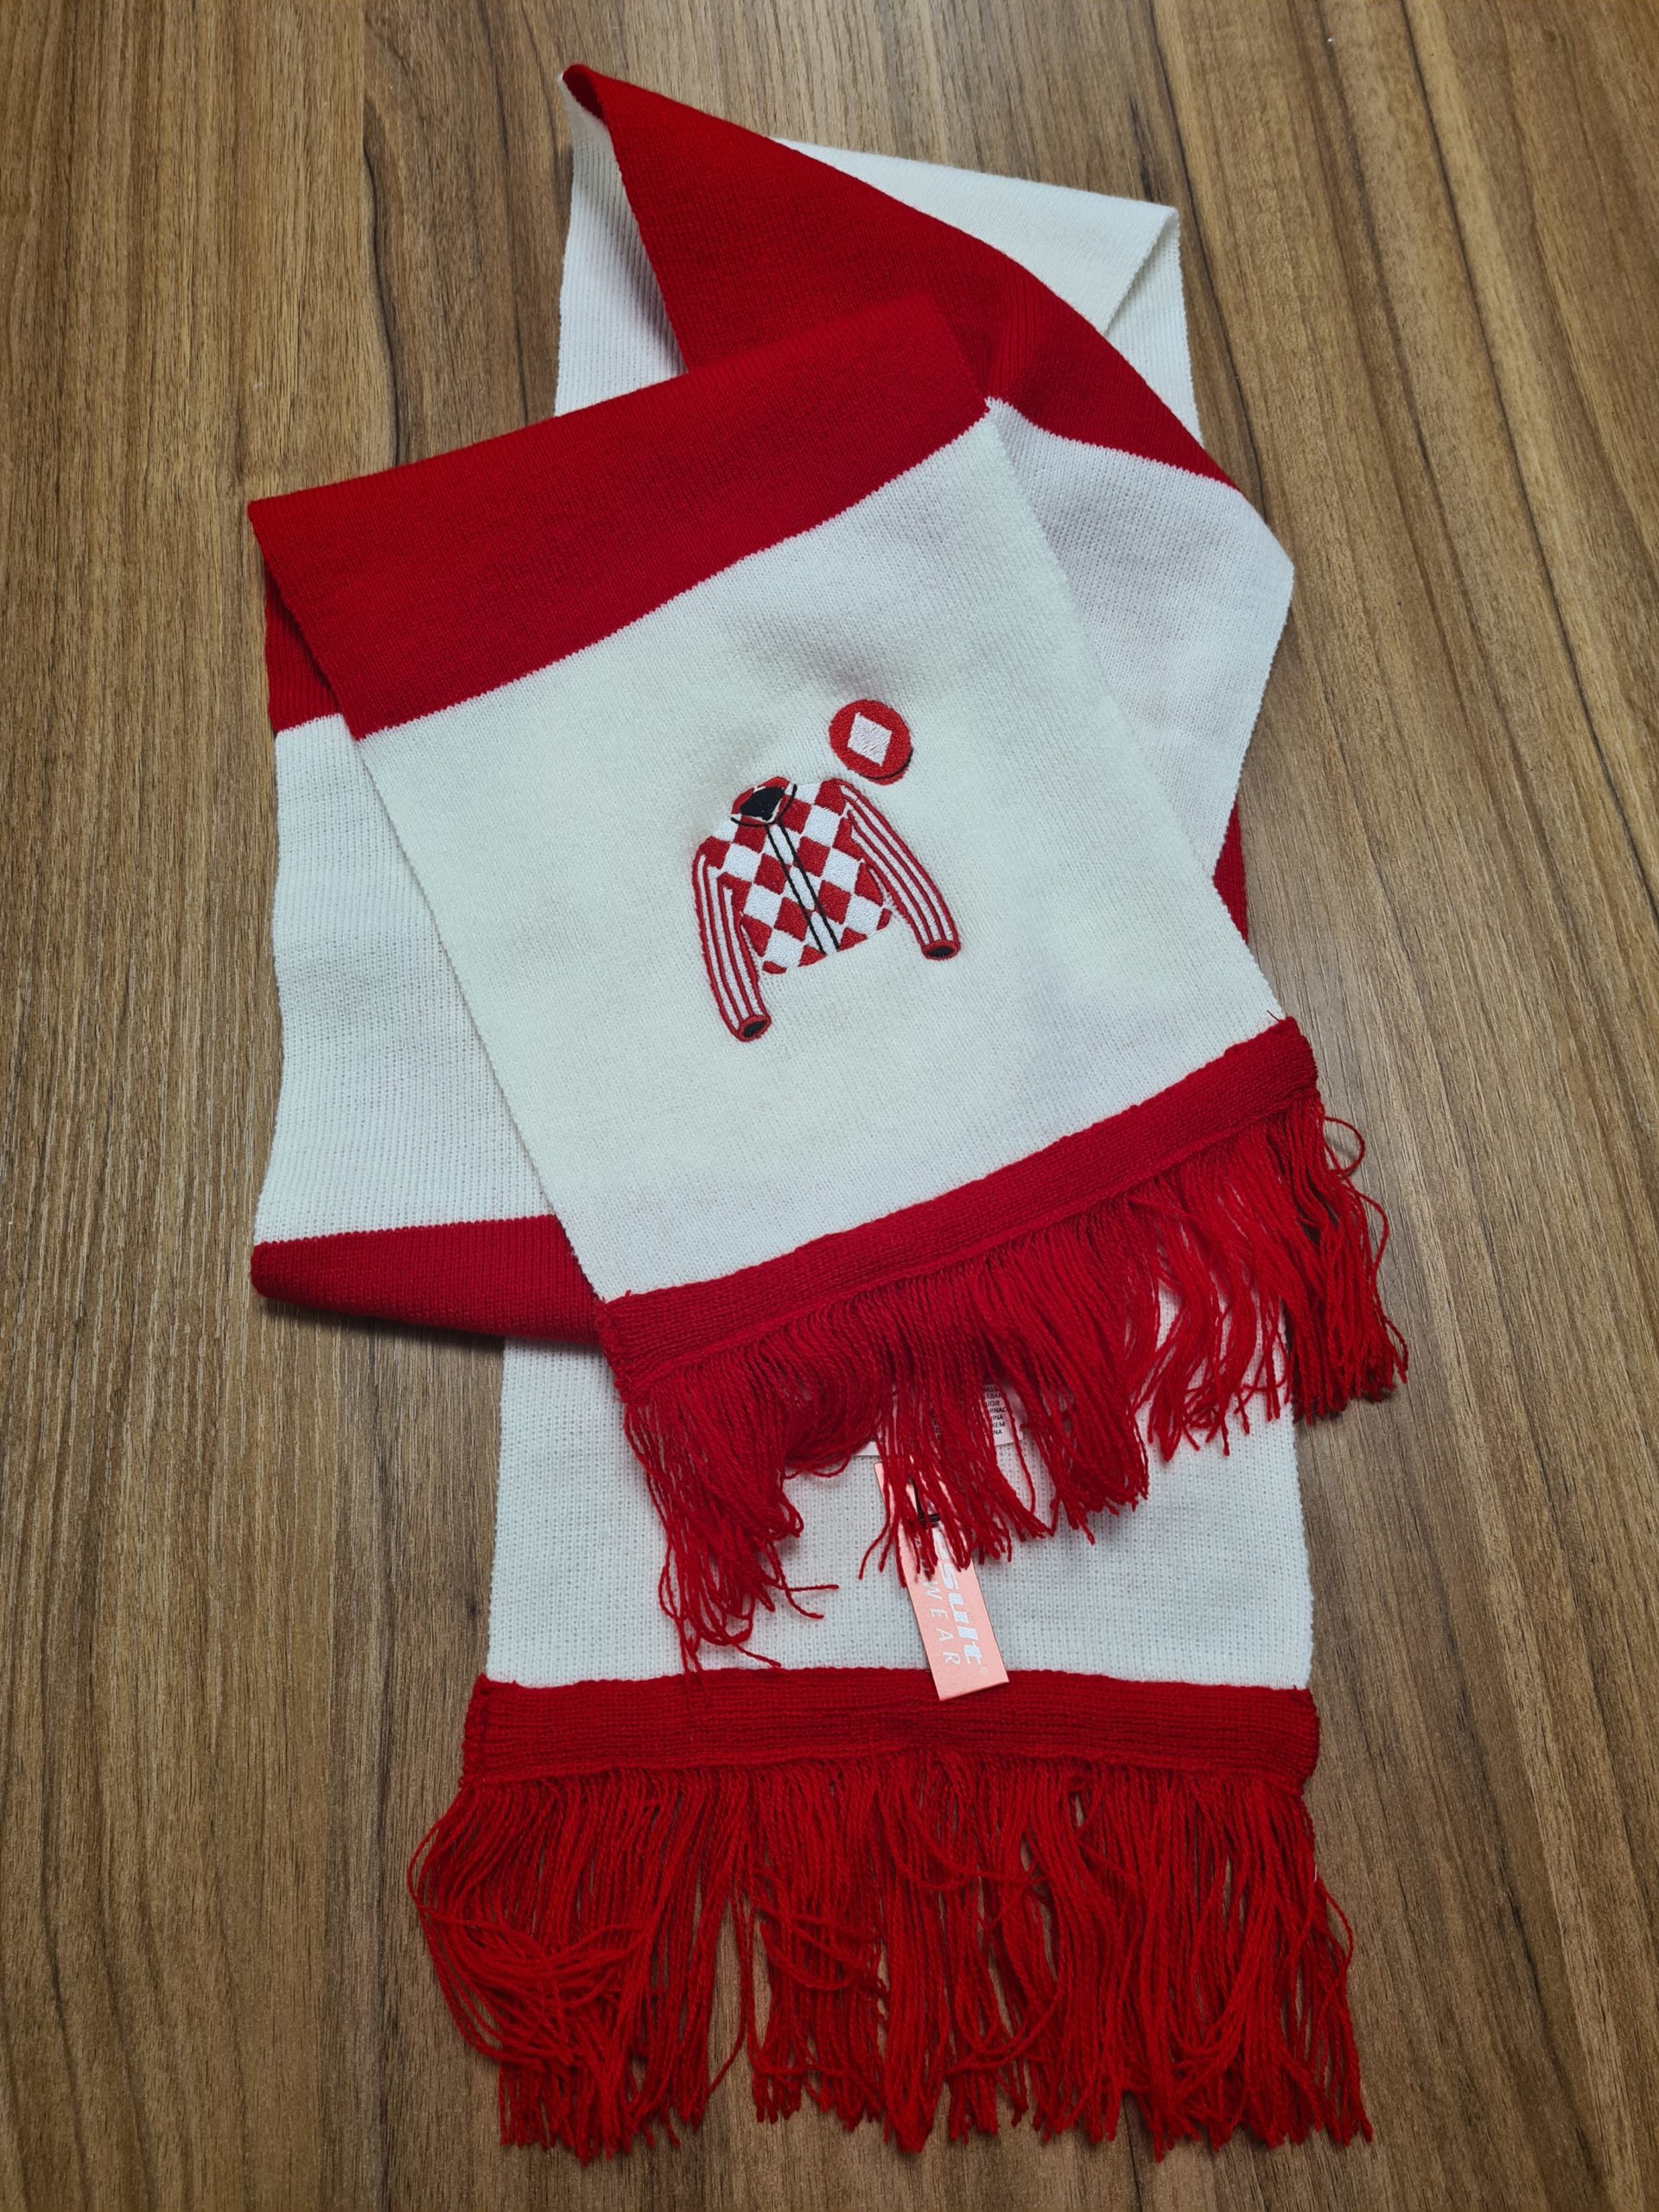 Club Scarf - Racehorse Ownership